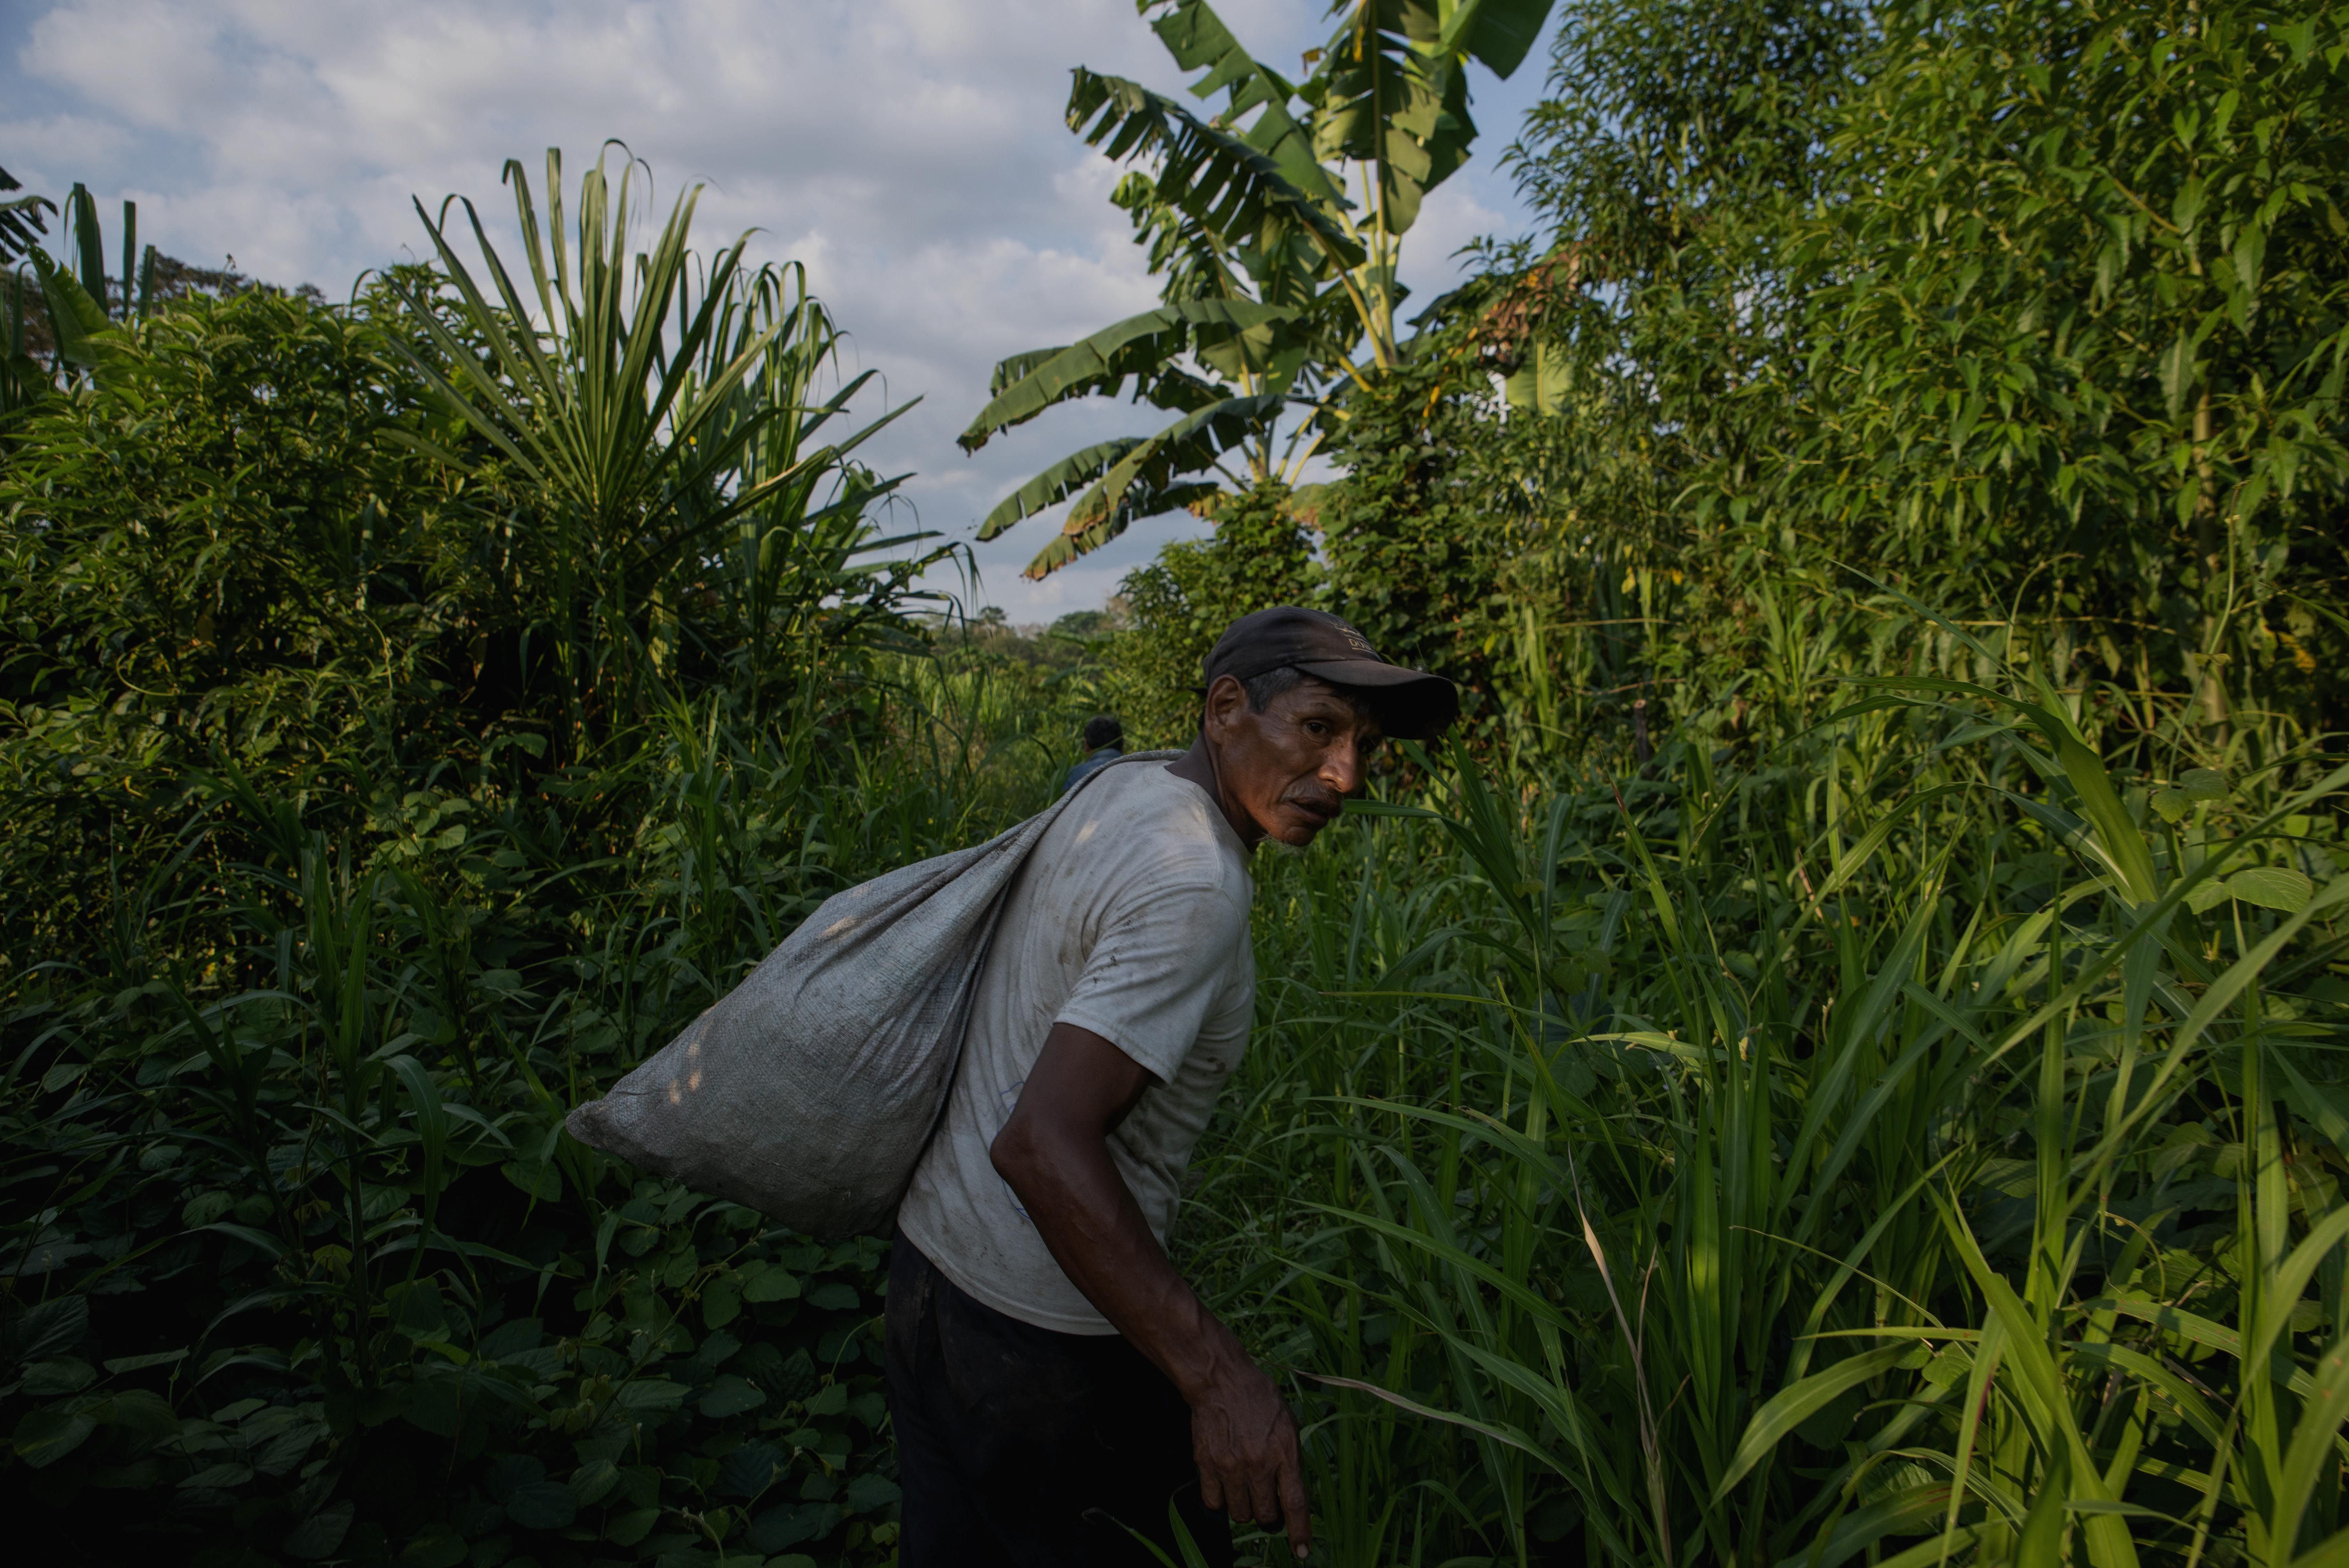 Salomón Quispe, fisherman from the Yuqui community, on his way to the river. Photo by Sara Aliaga. Bolivia, 2020.